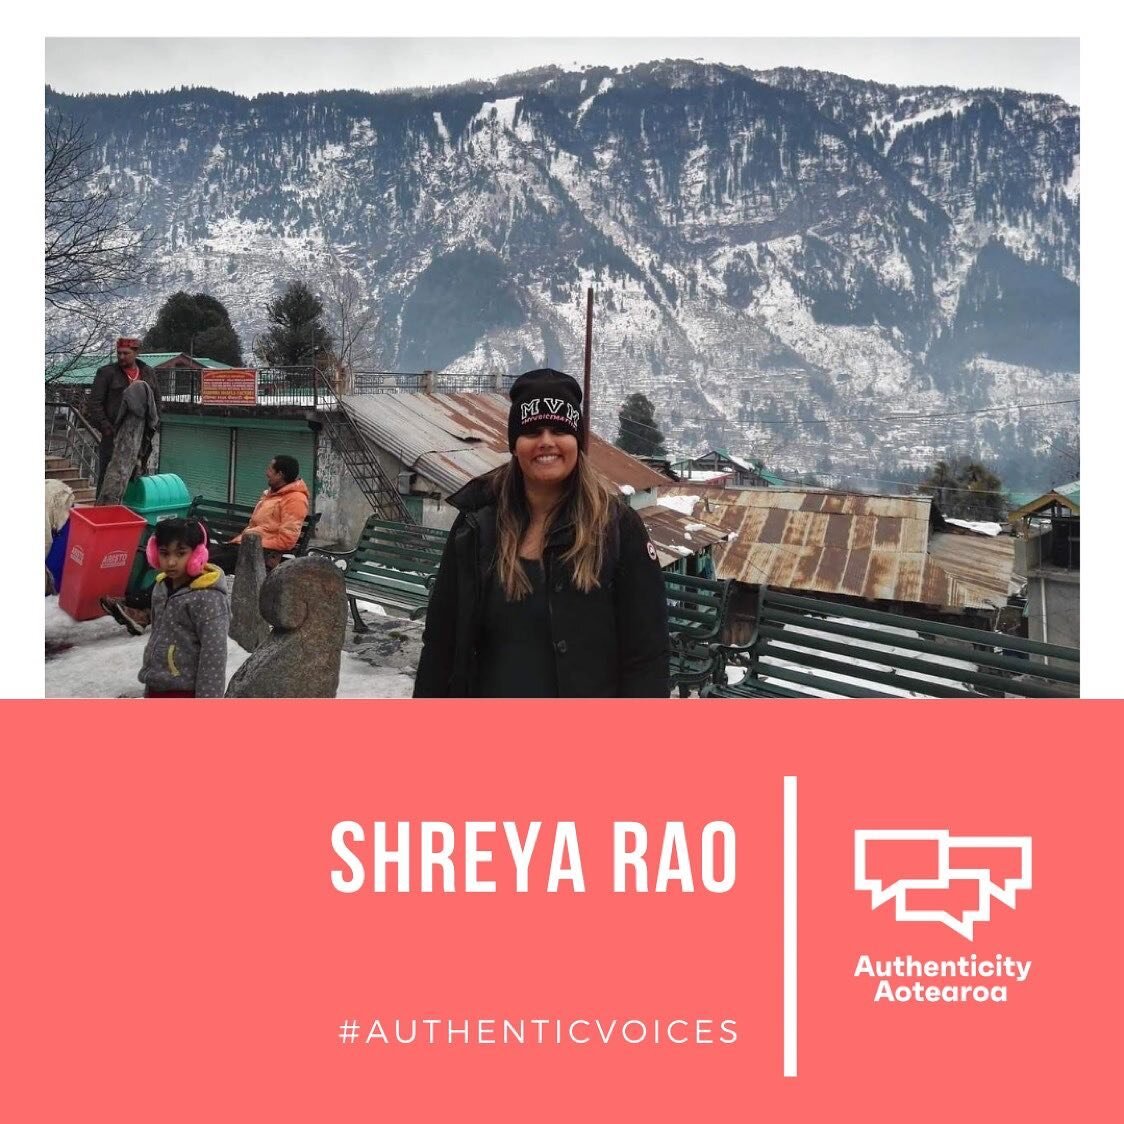 #AuthenticVoices // Introducing Shreya Rao ⚡️

My biggest challenge was knowing where I stand with the lockdown. While I am grateful for a slowing of pace, I am also anxious for the consequences on our economy. While I am grateful for the time at hom